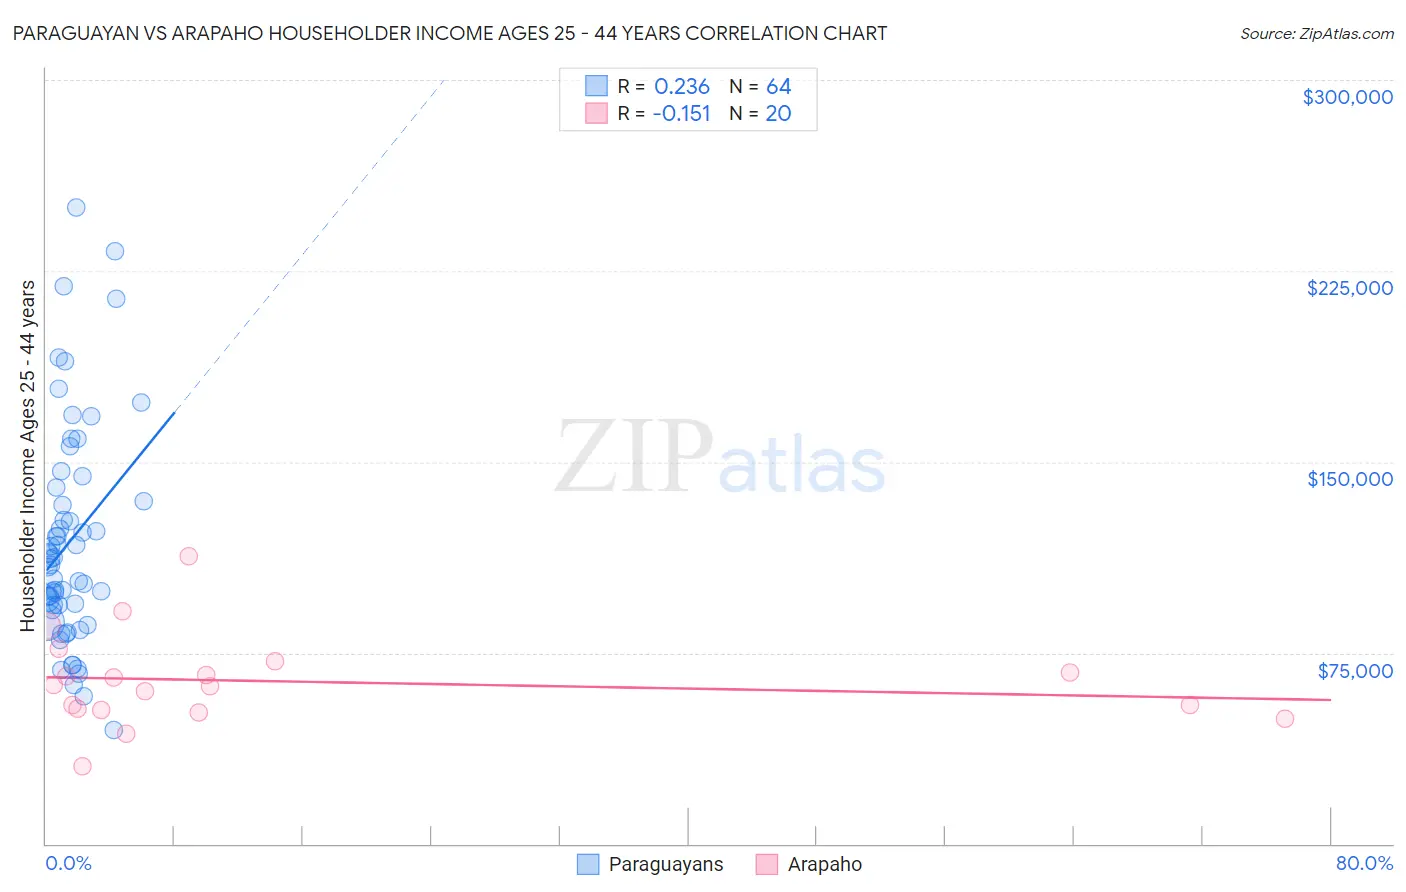 Paraguayan vs Arapaho Householder Income Ages 25 - 44 years